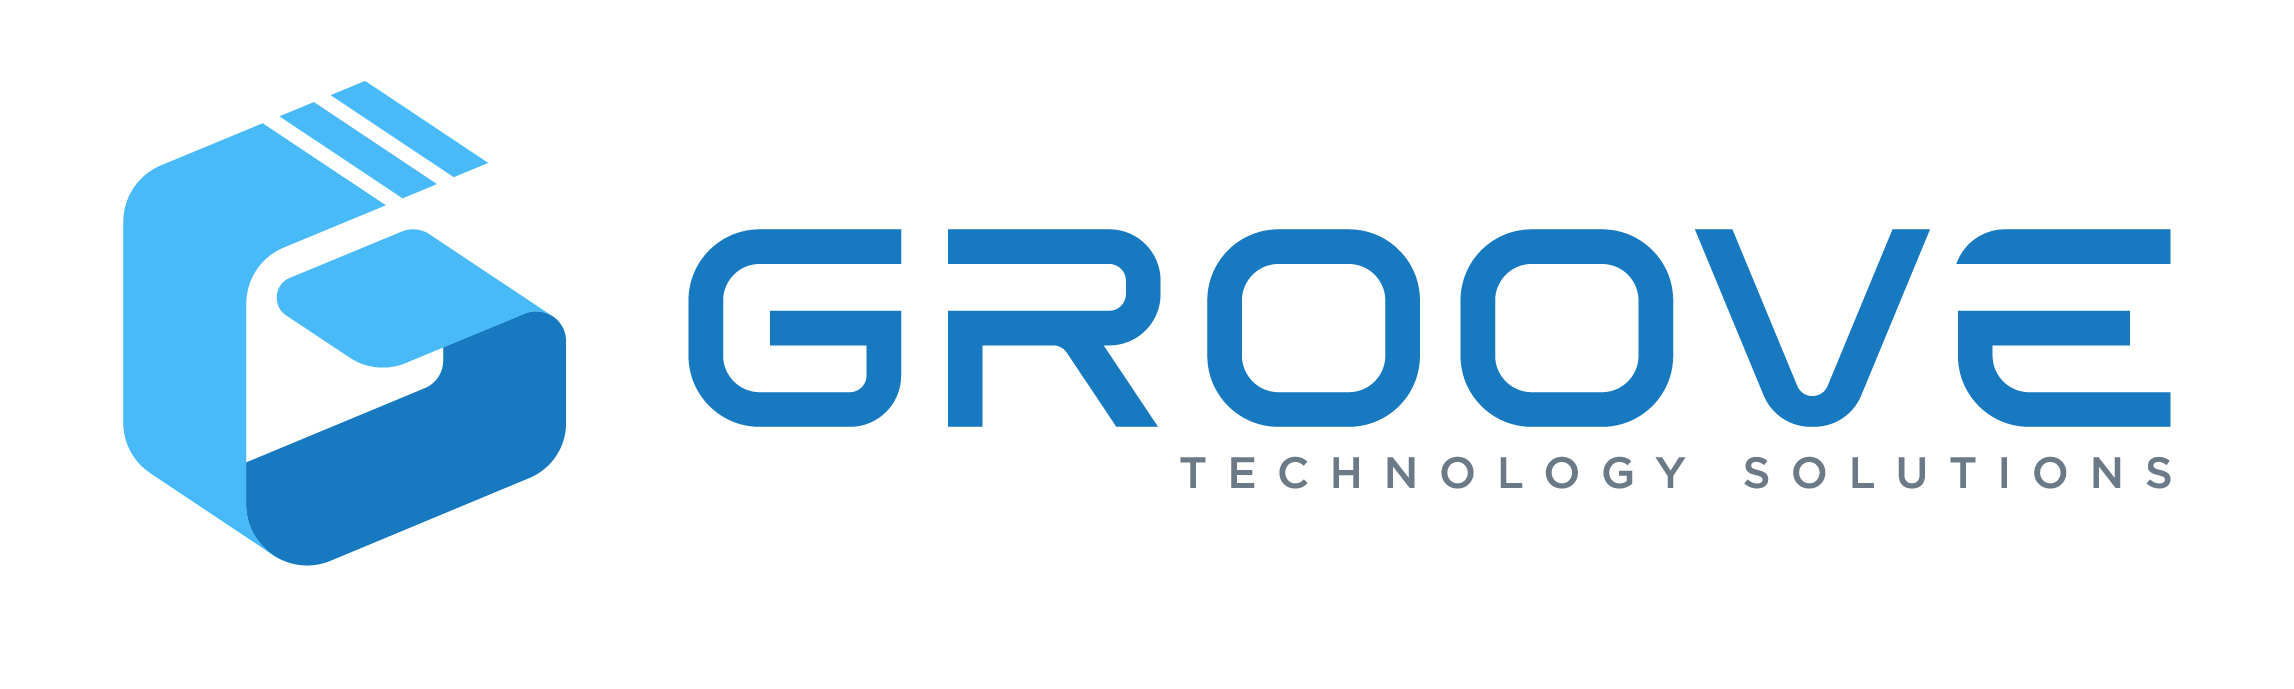 Groove Technology Solutions Company Logo